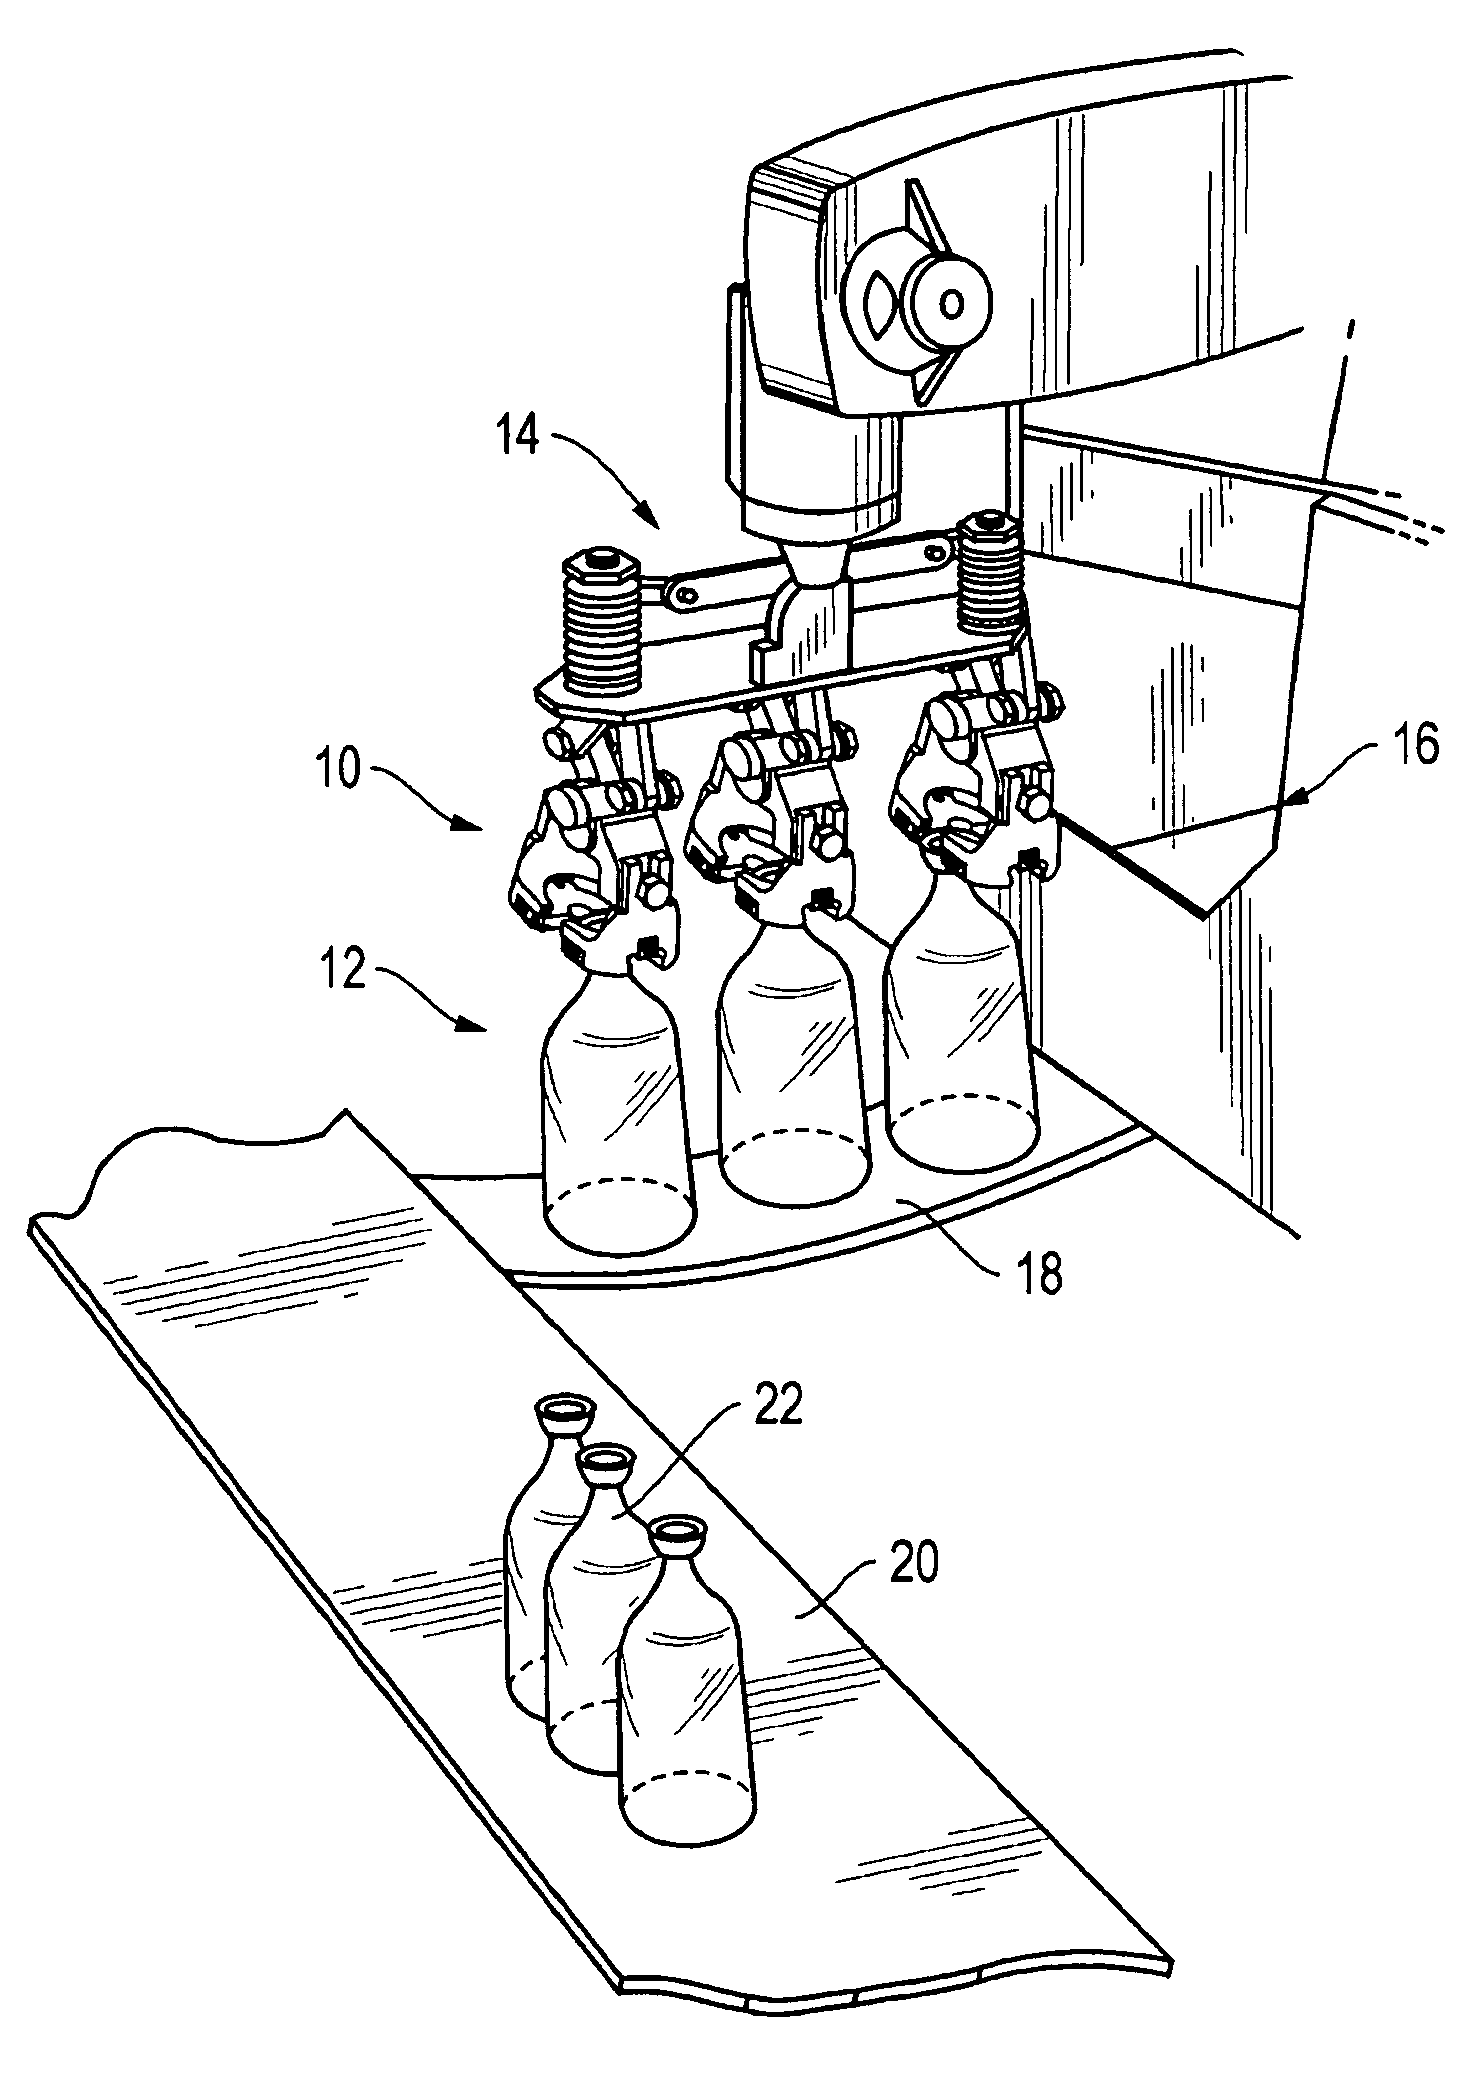 System, method, and apparatus for interchangeably accommodating both fixed and floating takeout inserts